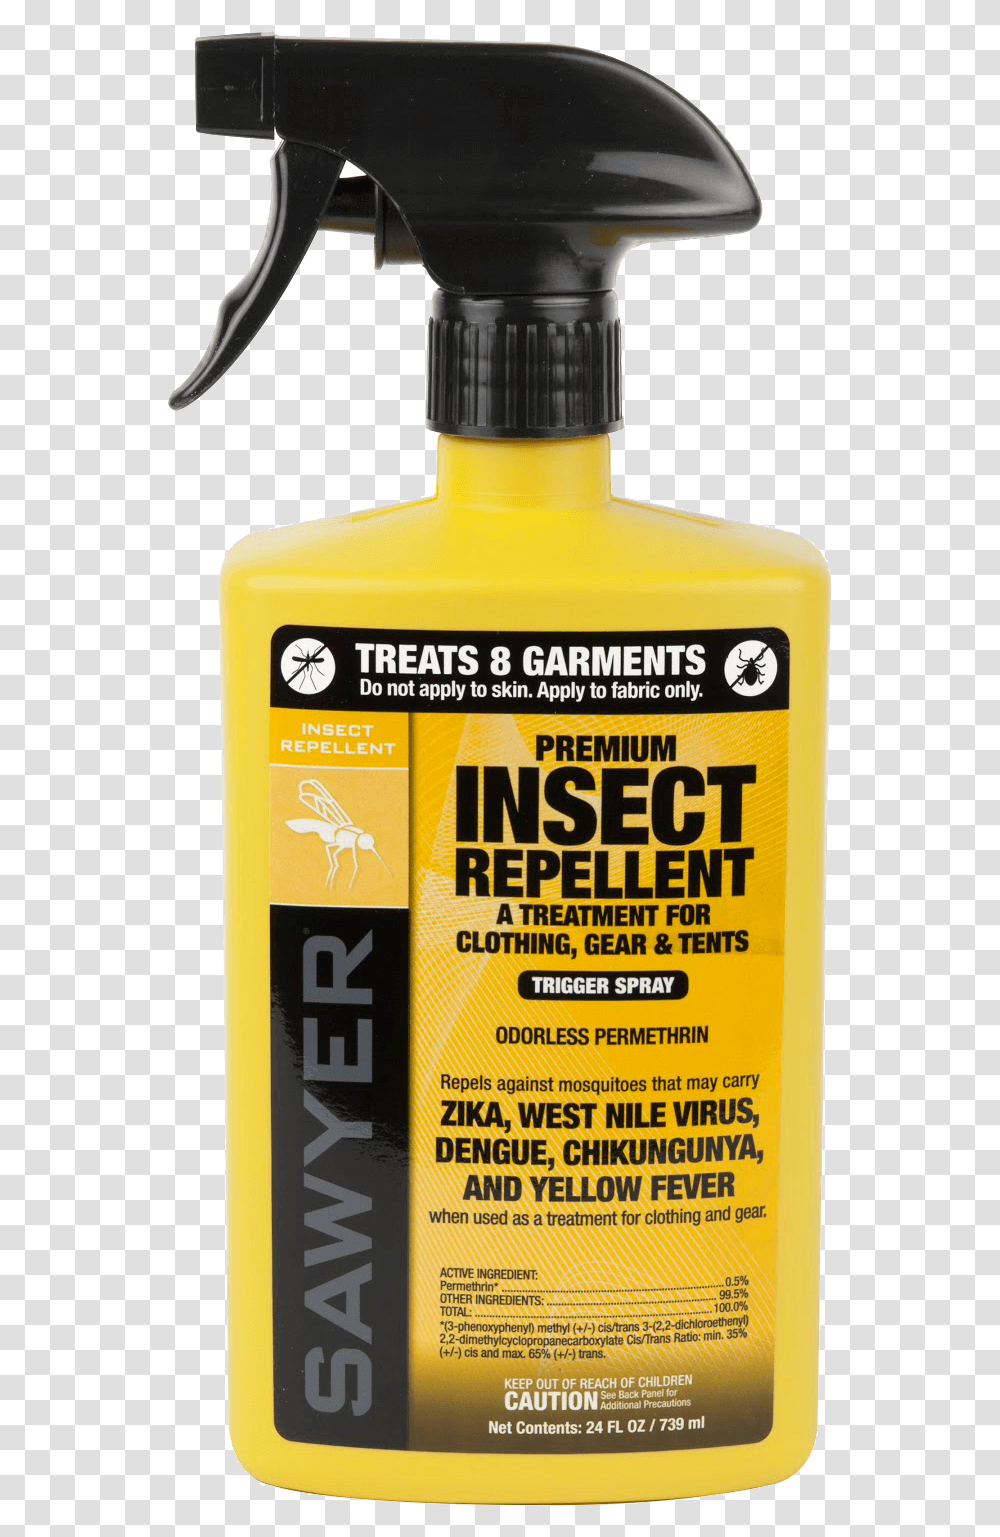 Permethrin Insect Repellent For Clothing Gear And Tents Sawyer Insect Repellent, Bottle, Sunscreen, Cosmetics, Label Transparent Png